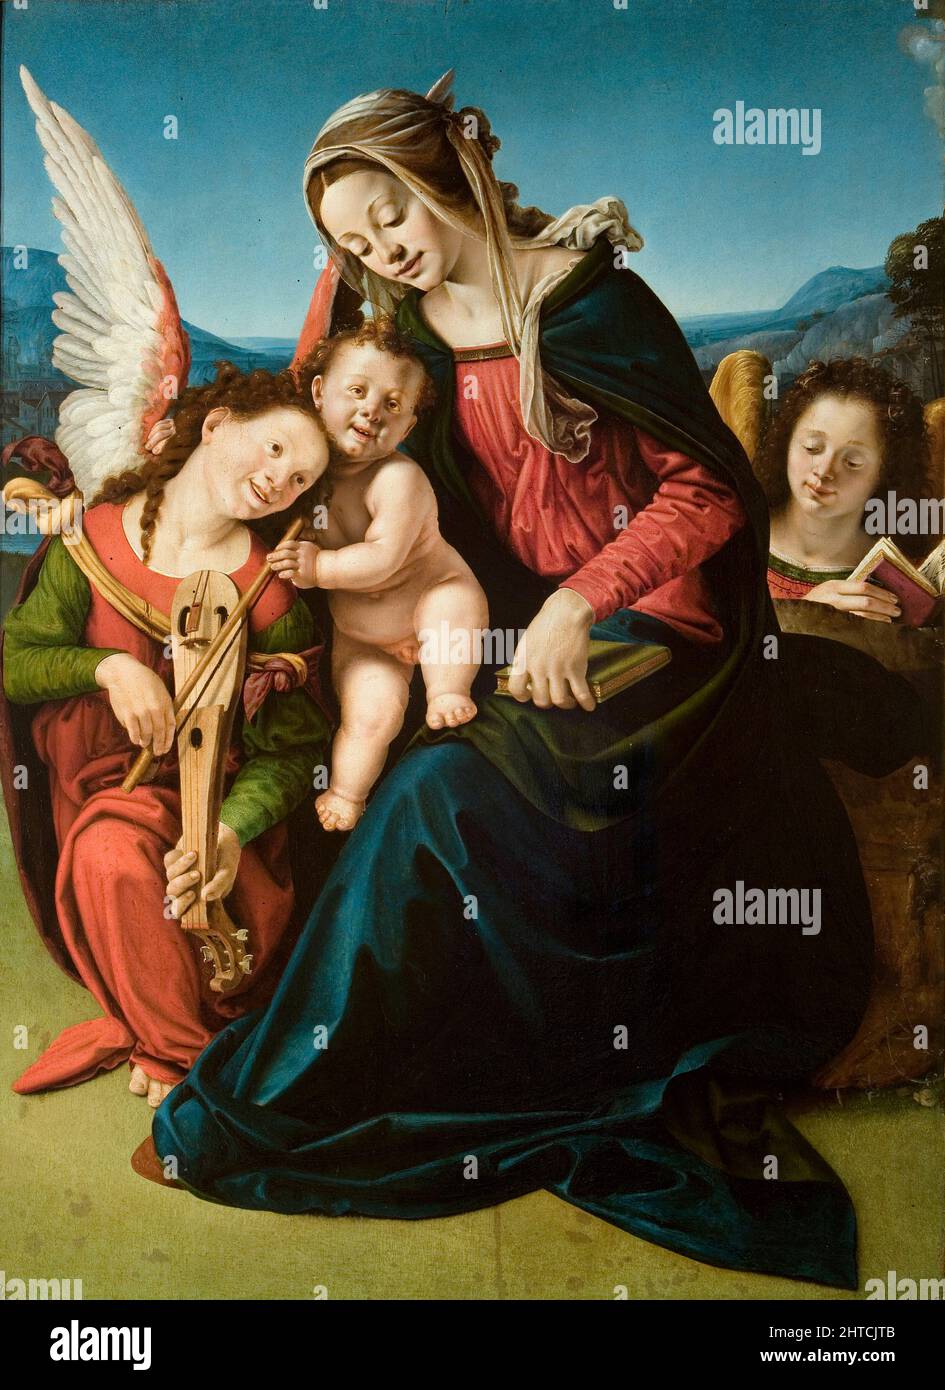 The Virgin and Child with two angels, ca. 1505-1510. Found in the Collection of the Fondazione Cini, Venezia. Stock Photo